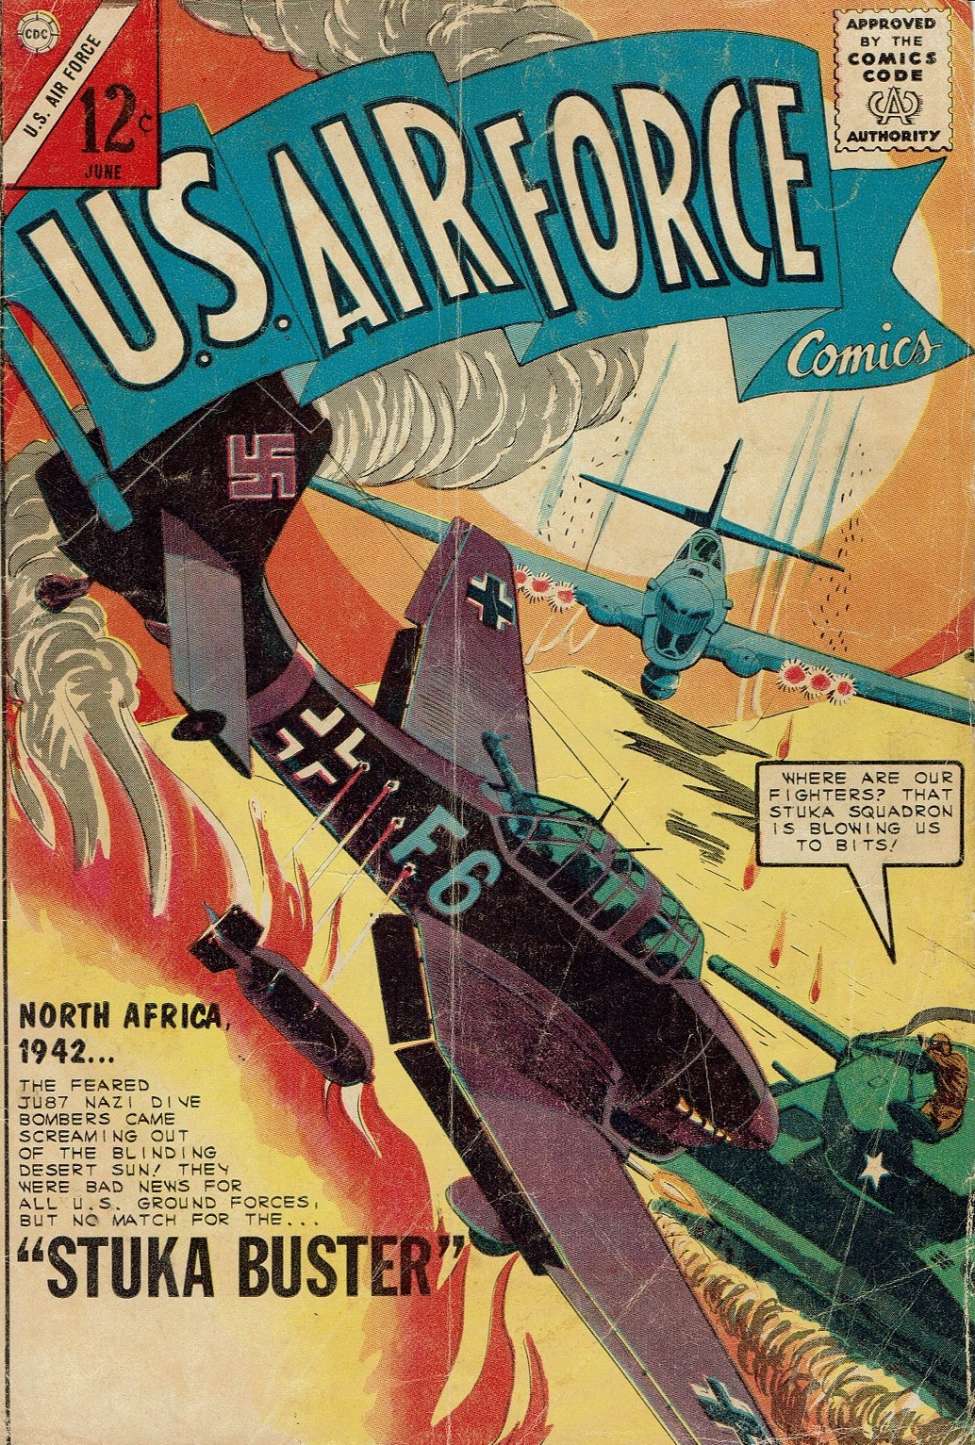 Book Cover For U.S. Air Force Comics 33